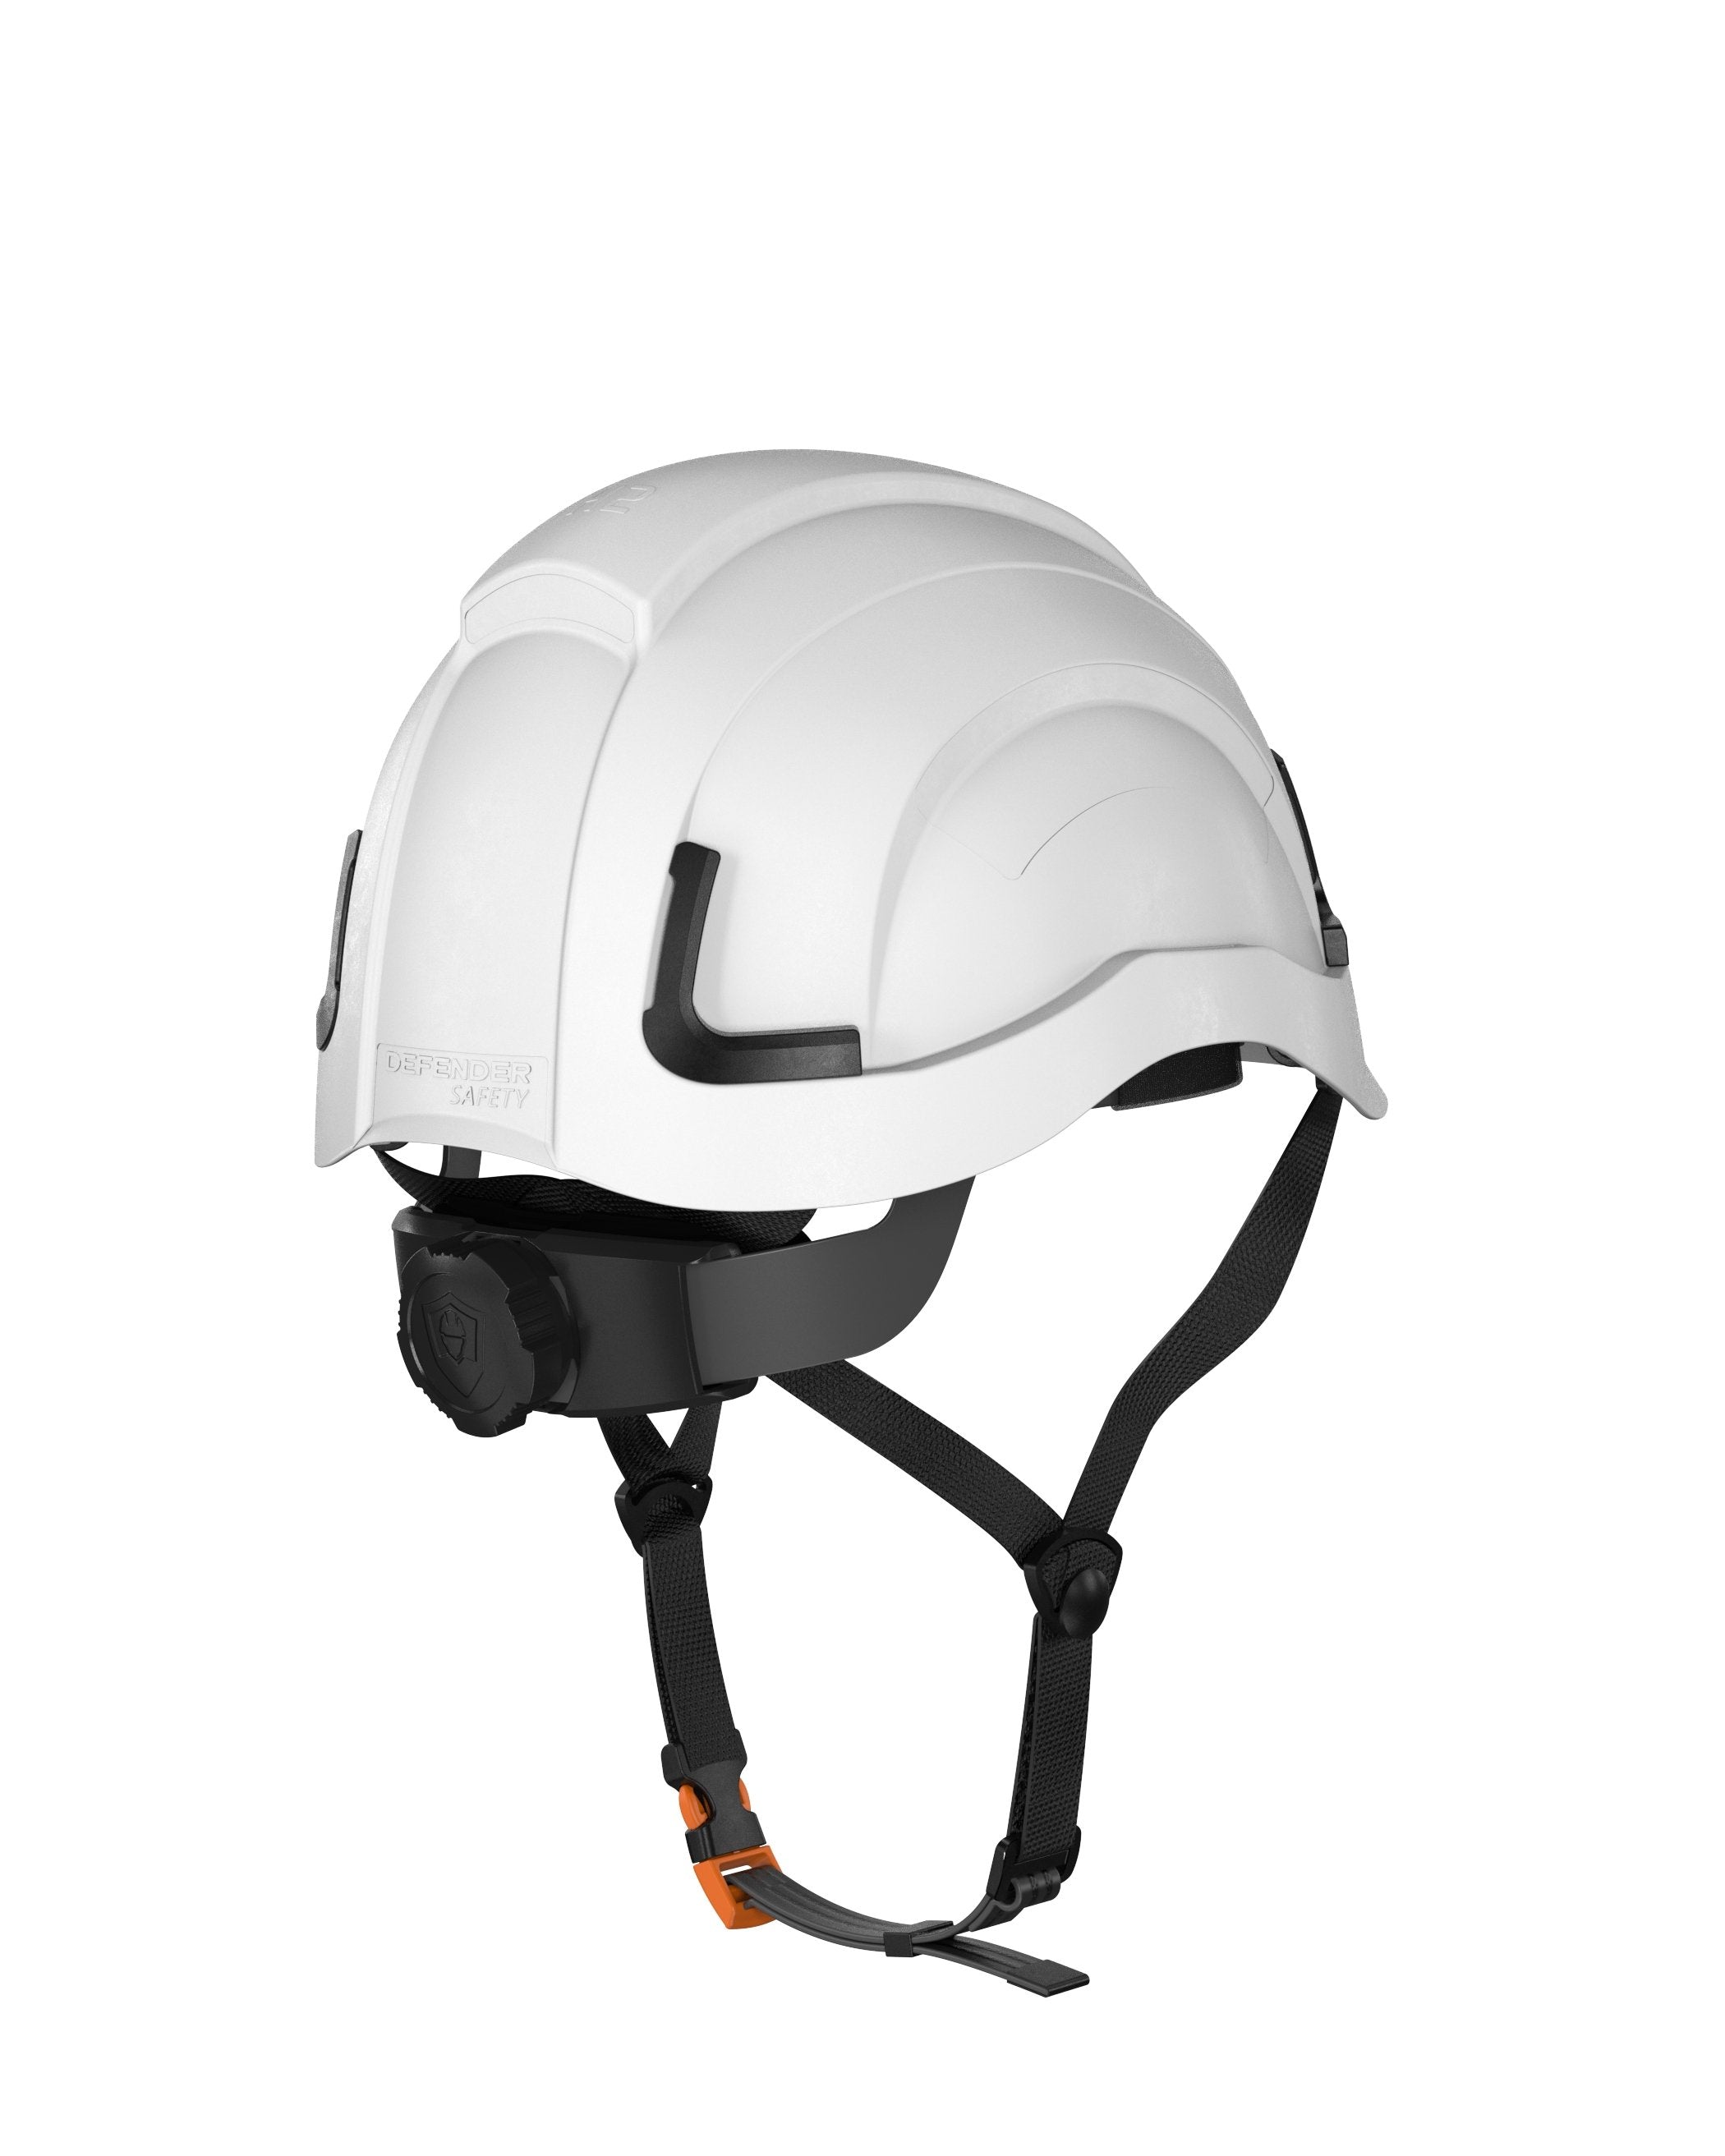 H2-EHV Safety Helmet w/ TINTED Visor Type 2 Class E, ANSI Z89 and EN12492 rated - Defender Safety